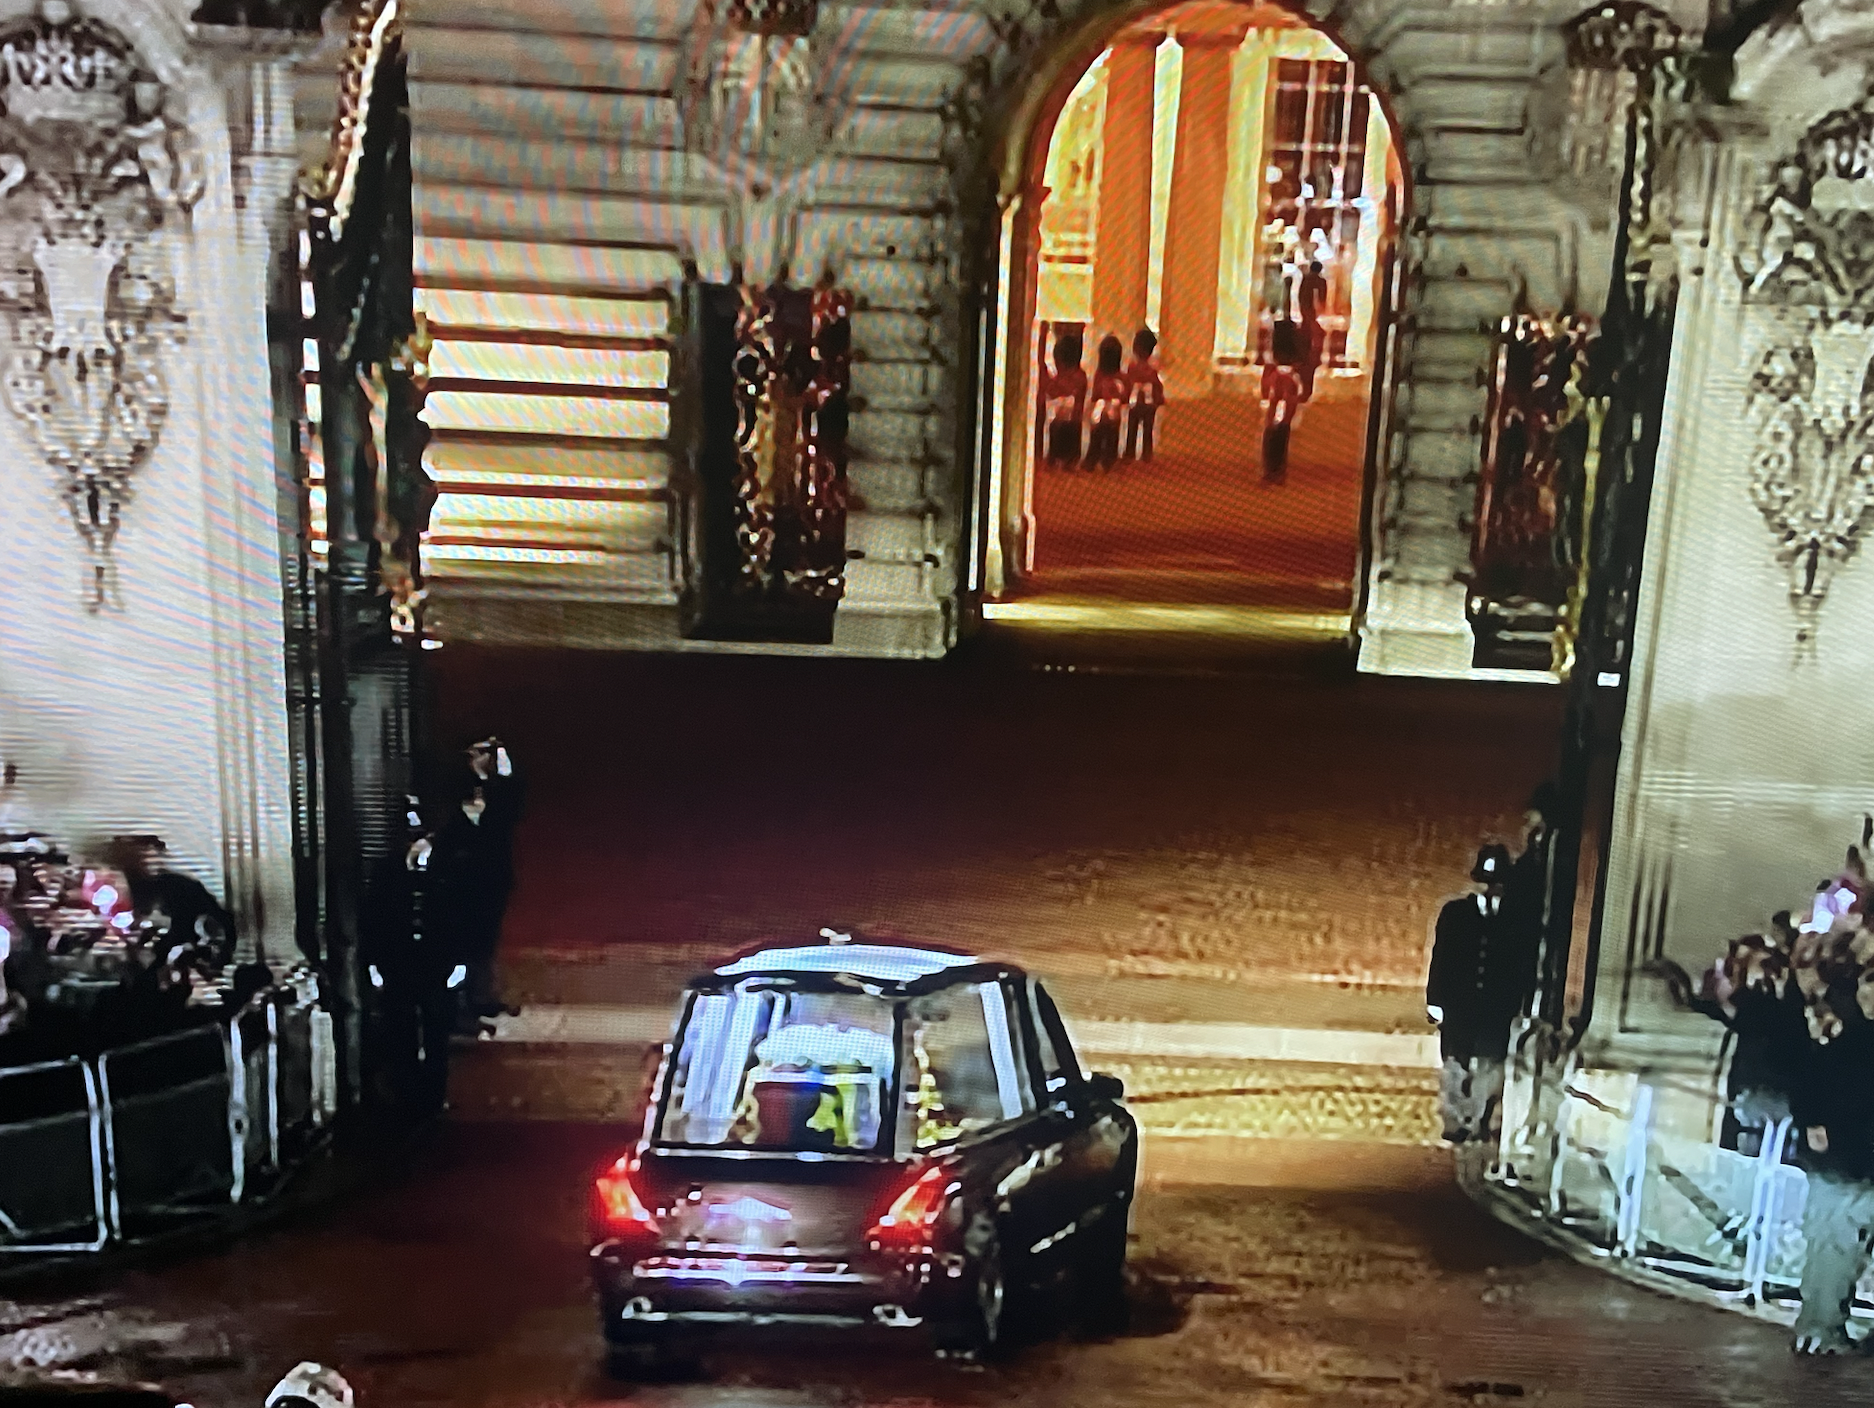 The Queen's coffin enters Buckingham Palace gates.